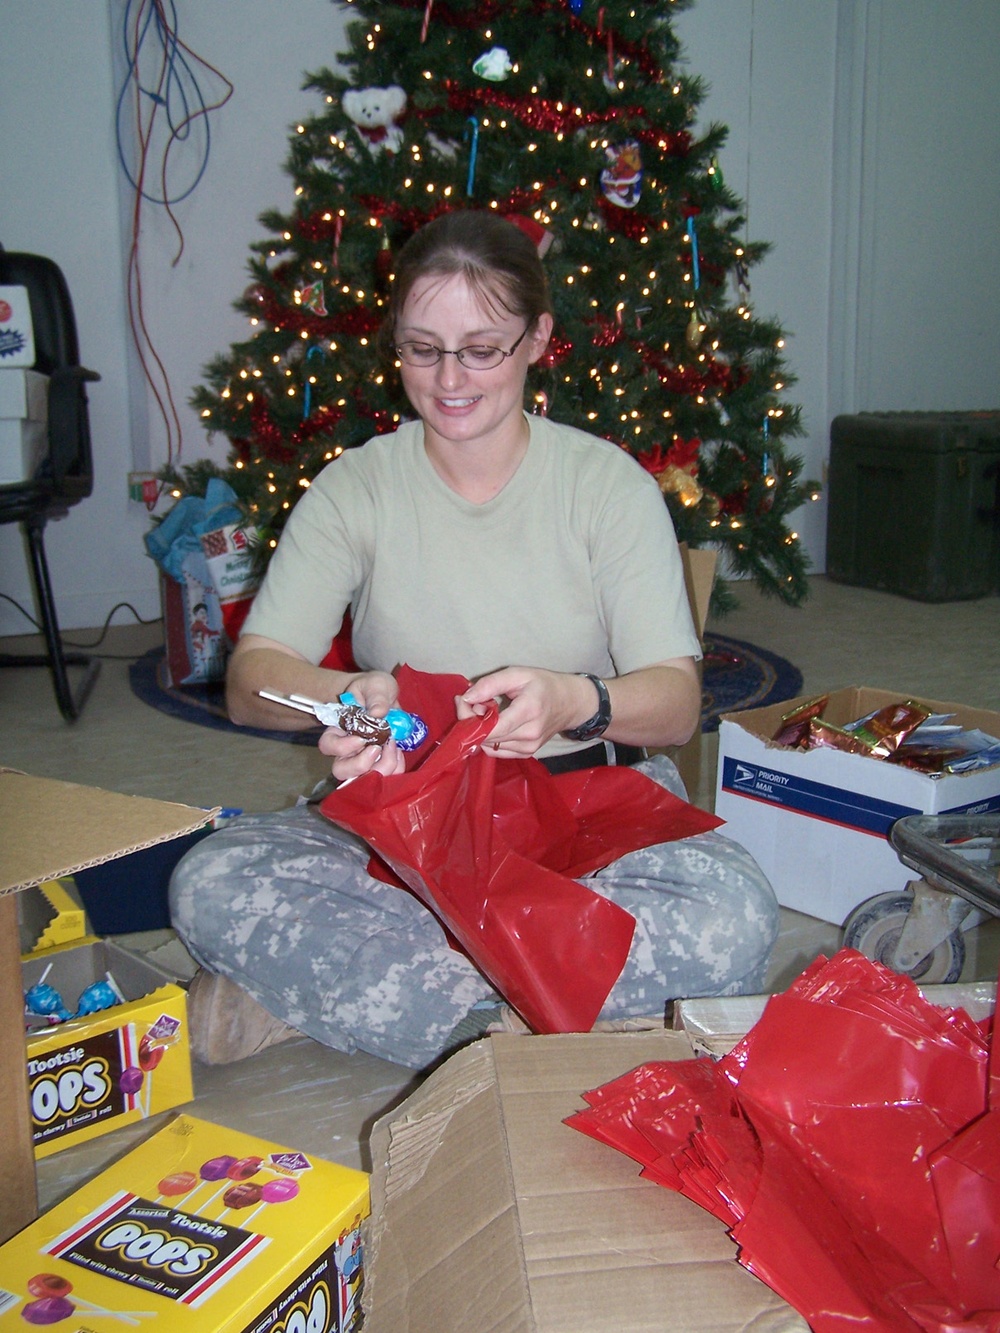 Two Soldiers bring Christmas to others